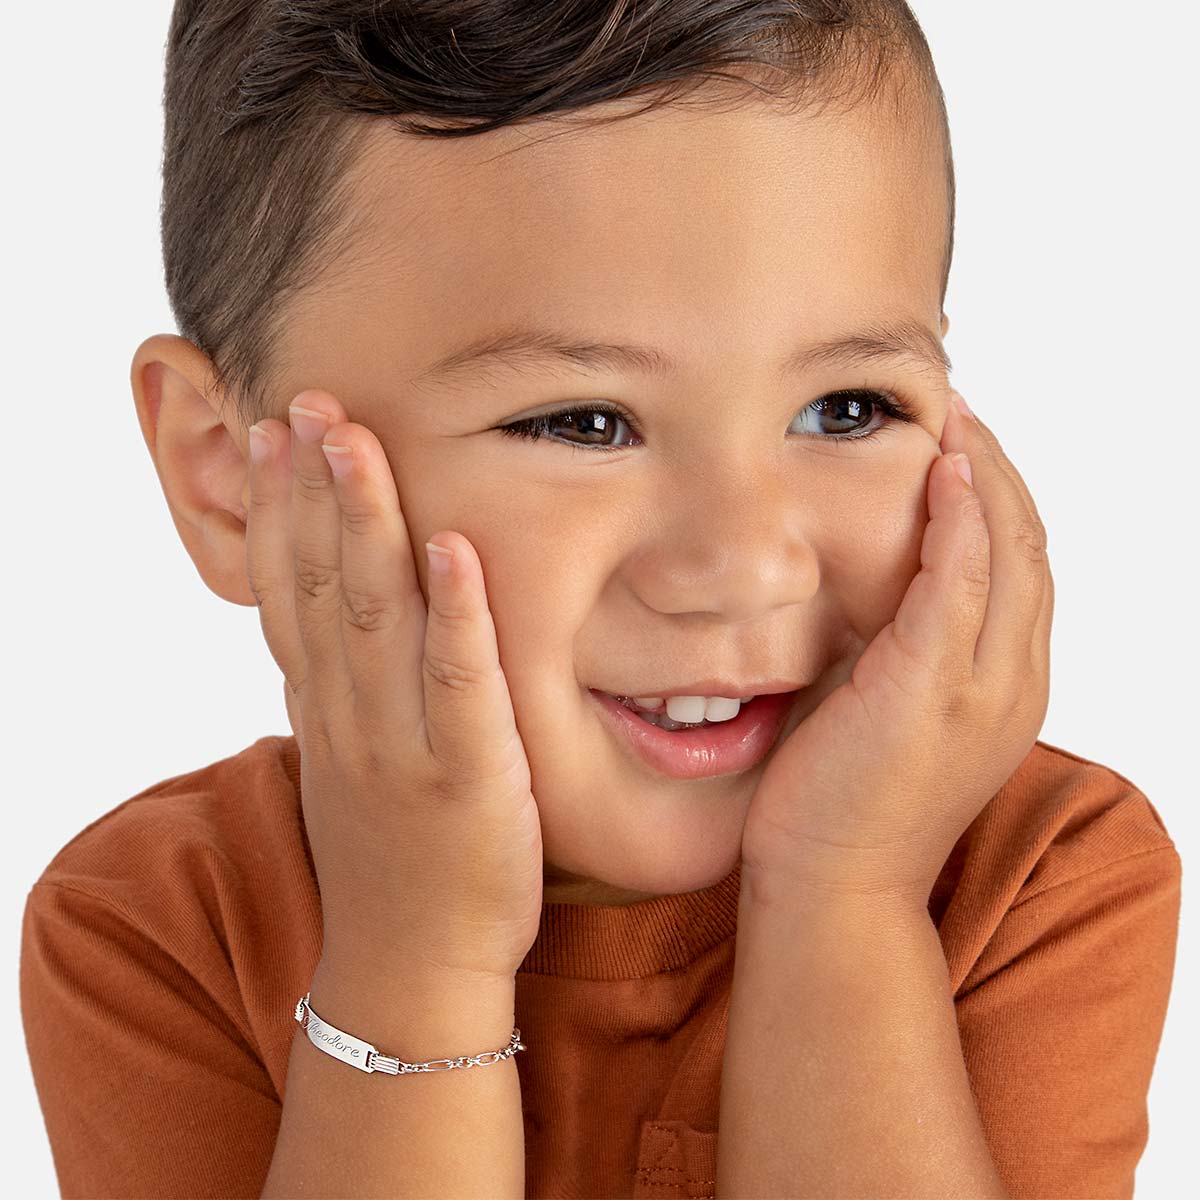 Child and Baby Boys Jewelry